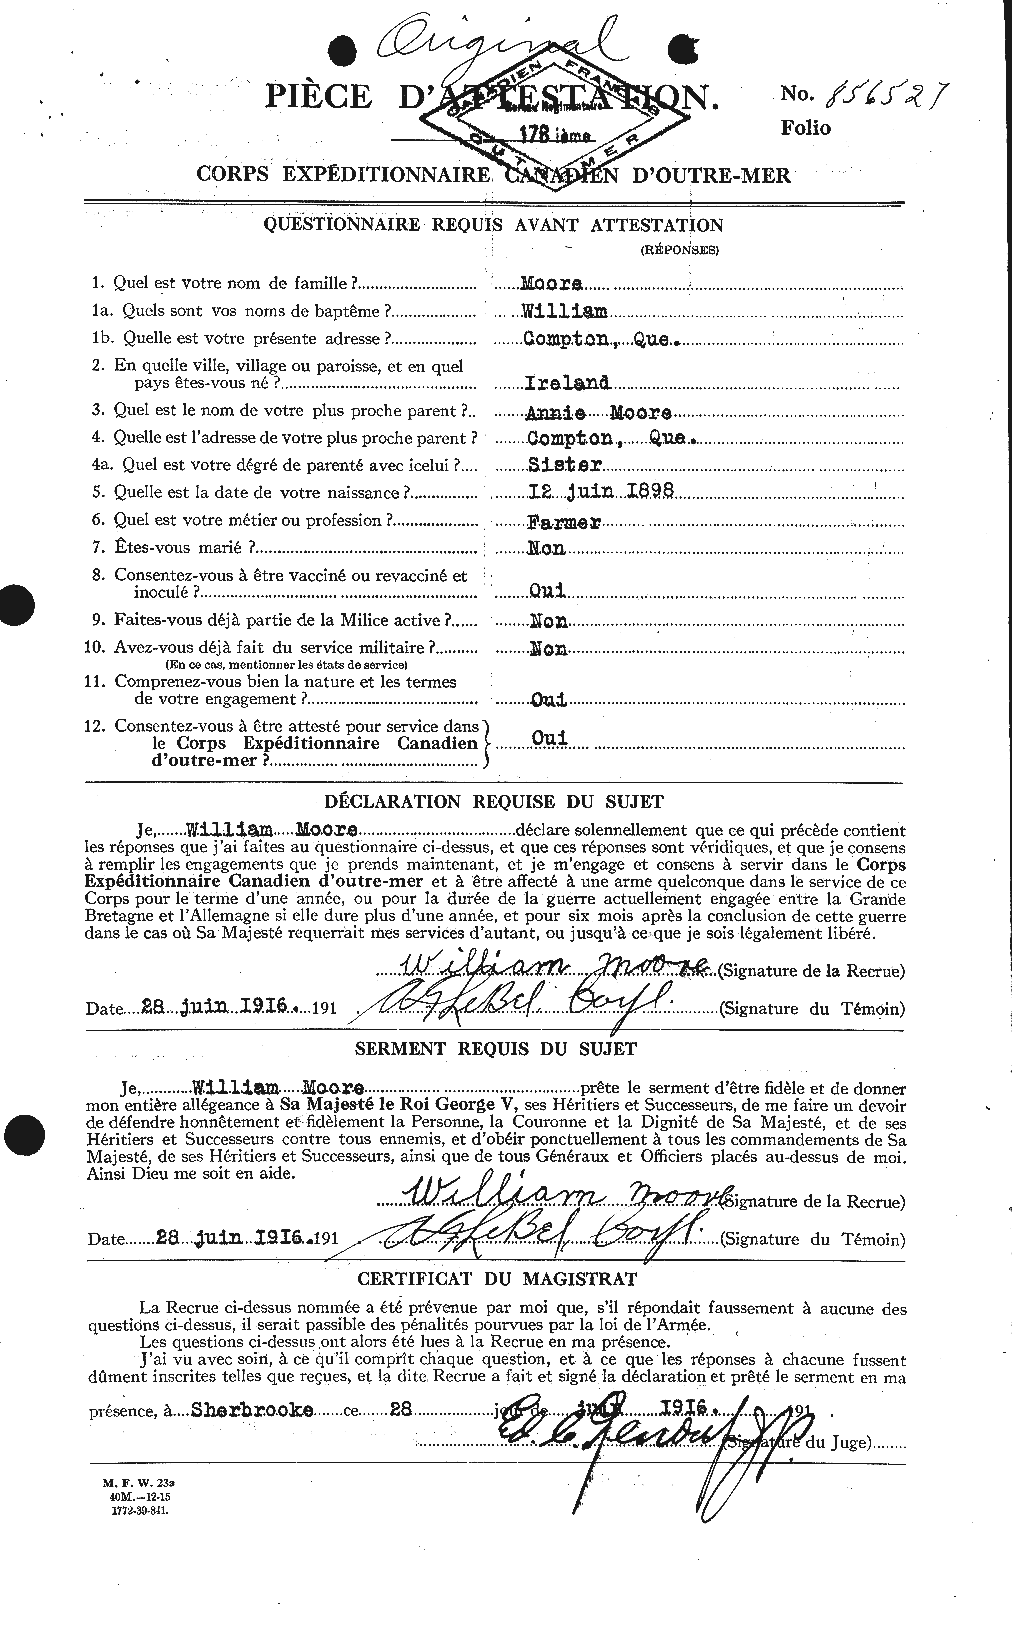 Personnel Records of the First World War - CEF 505754a